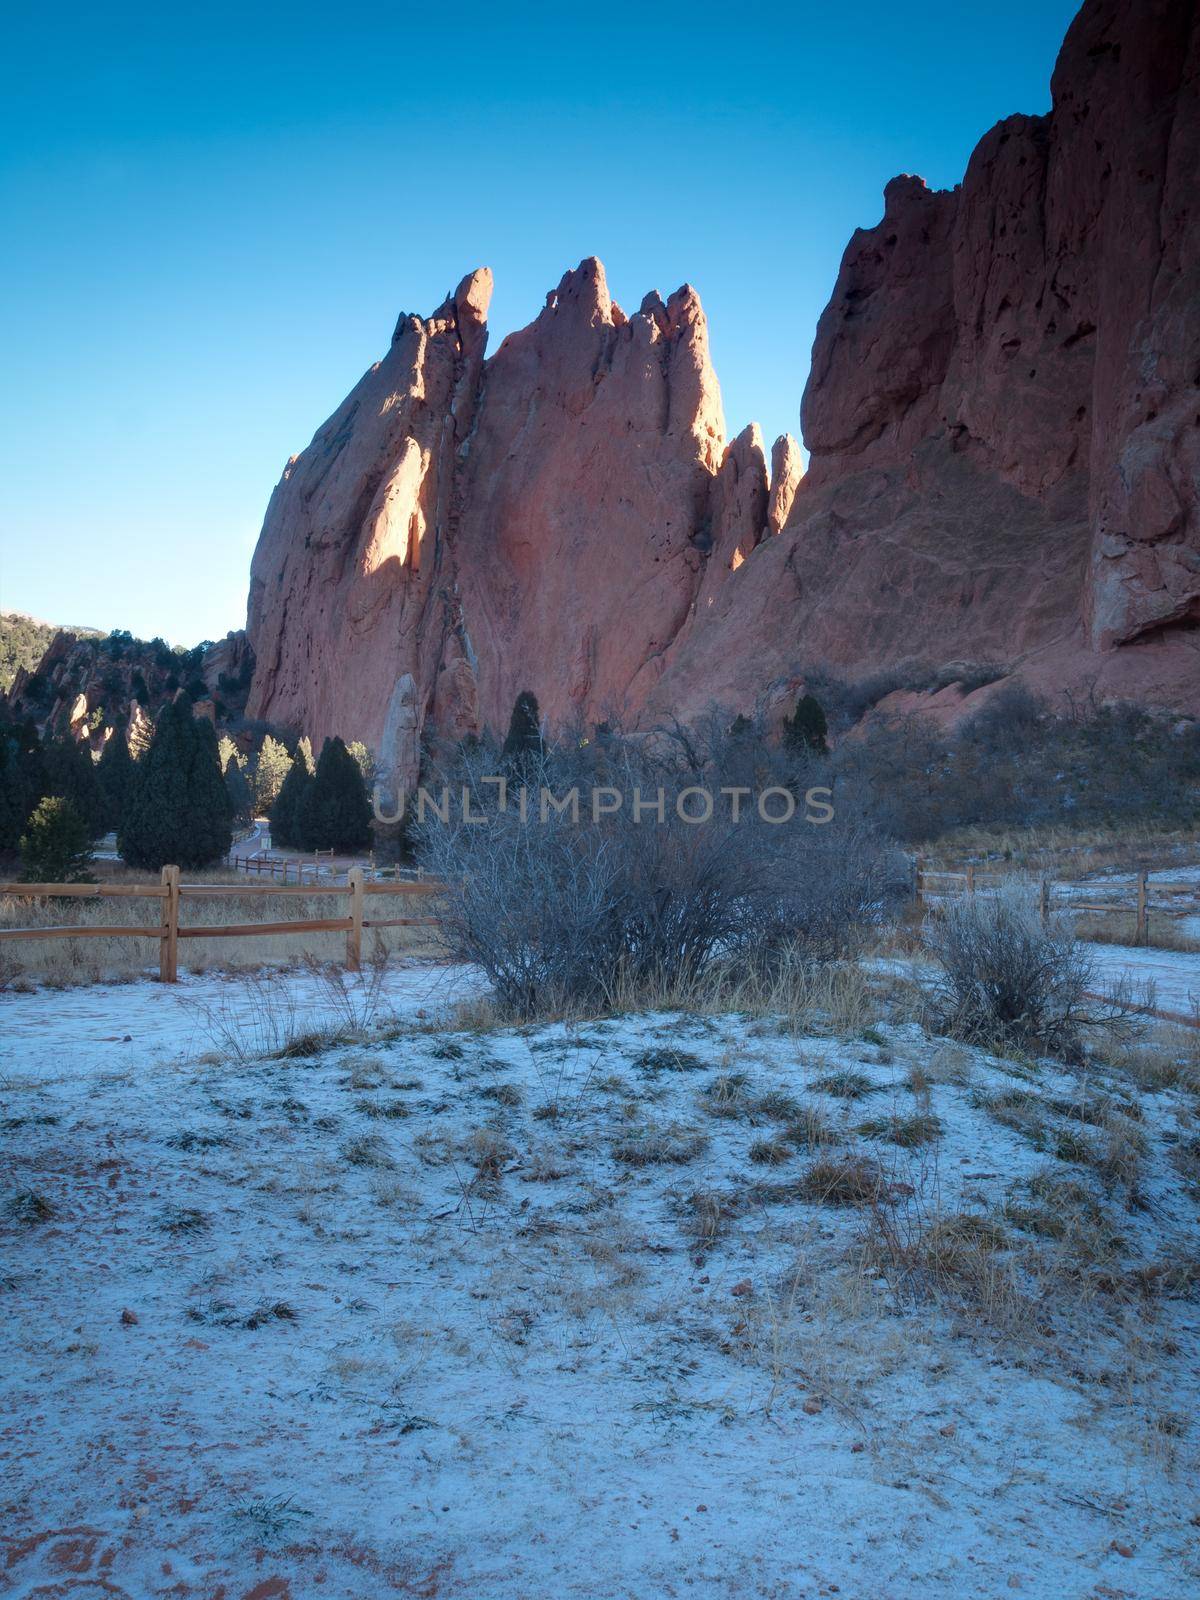 Sunrise at Garden of the Gods Rock Formation in Colorado.